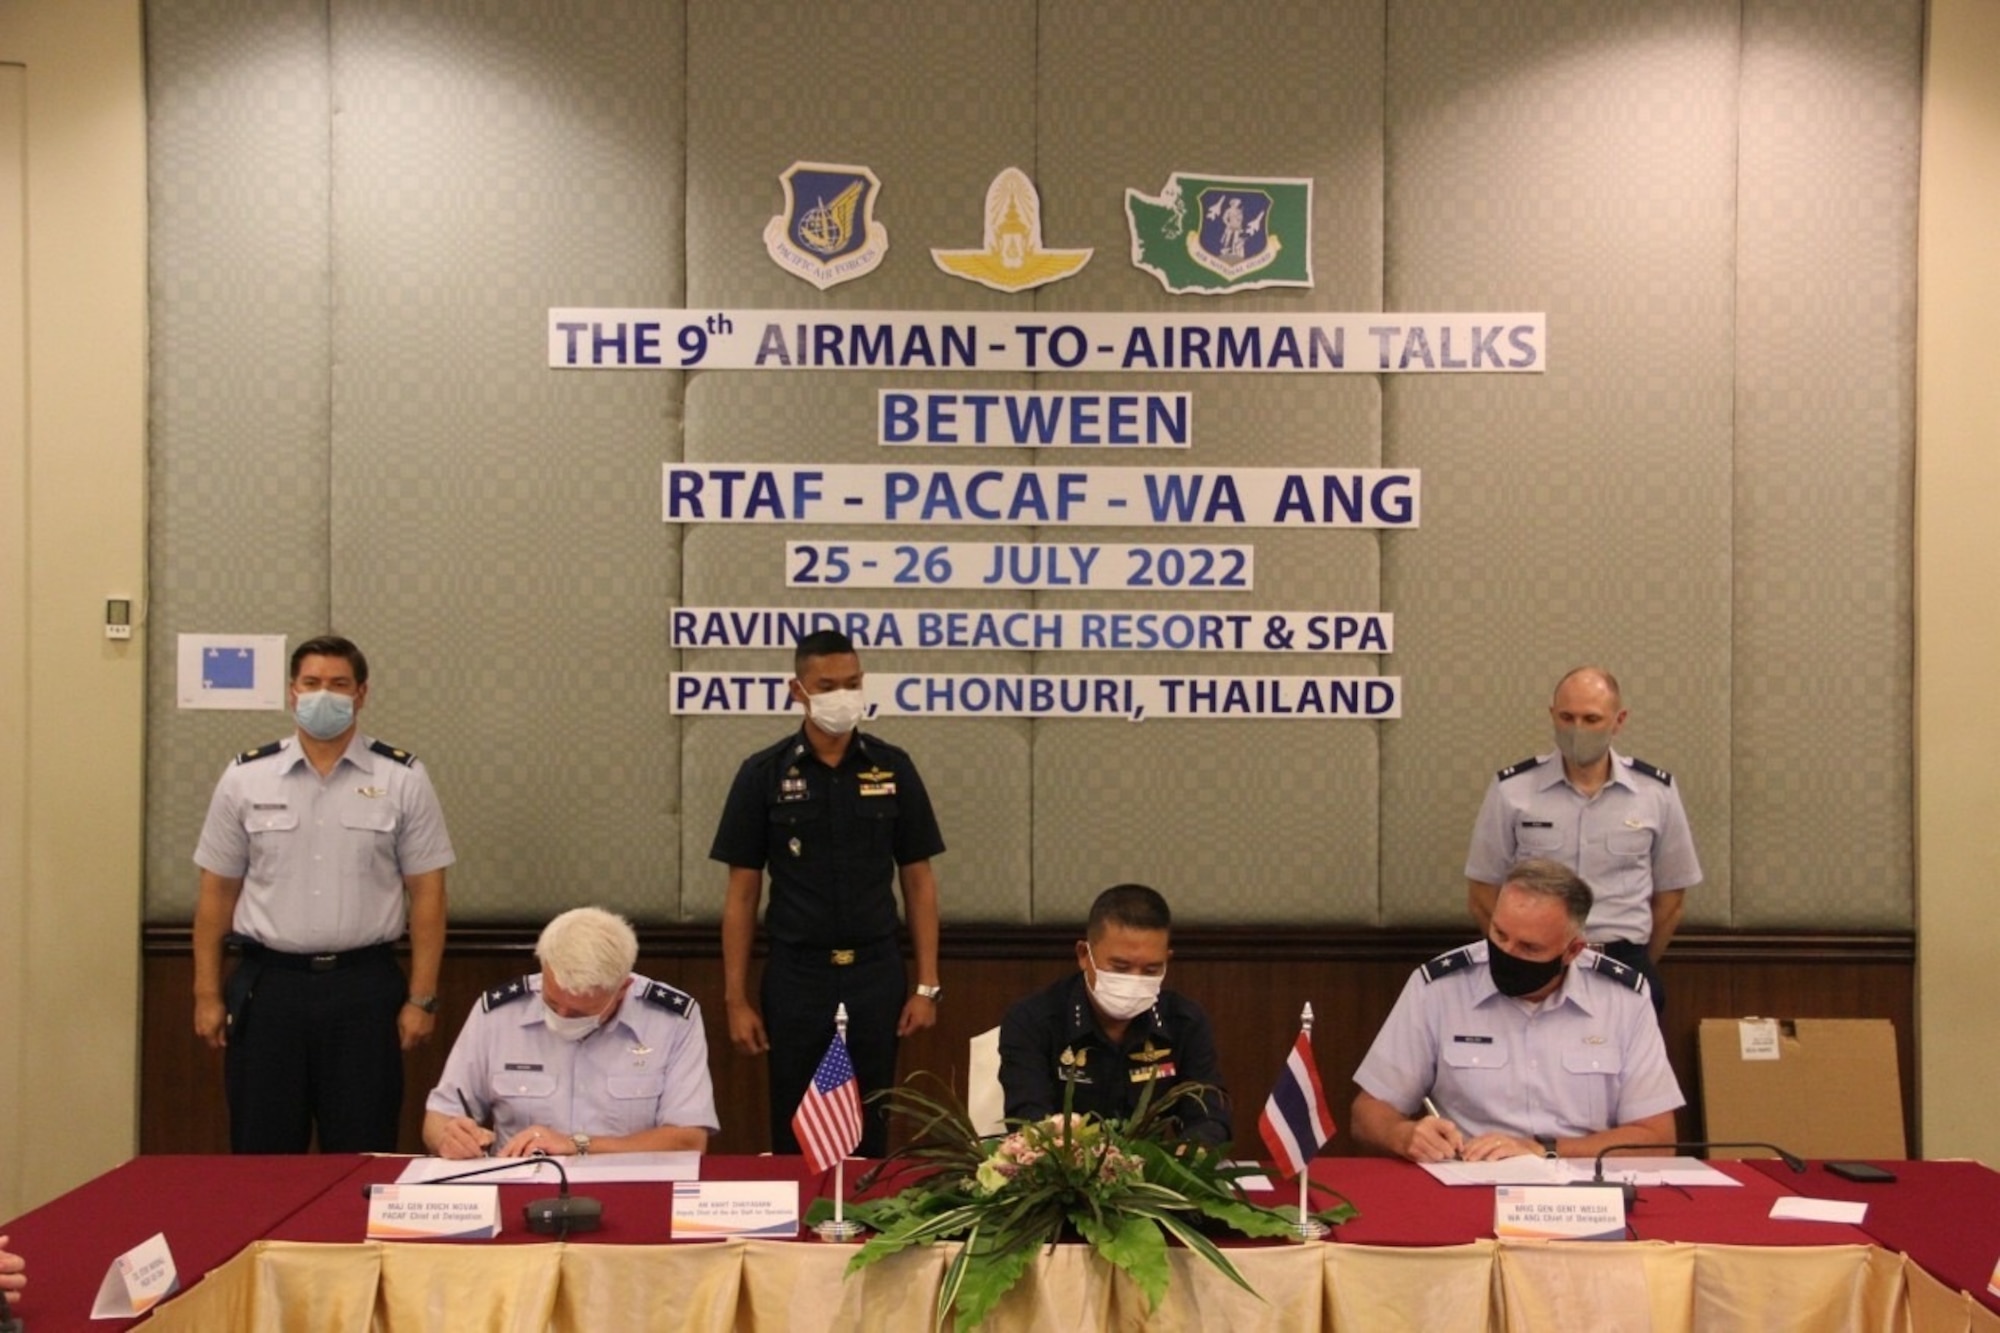 U.S. Air Force Maj. Gen. Erich Novak, Mobilization Assistant to the Commander, Pacific Air Forces, Royal Thai Air Force Air Marshal Kanit Chaiyasarn, Deputy Chief of the Air Staff, and U.S. Air Force Brig. Gen. Gent Welsh, Washington Air National Guard commander, sign the final minutes for the ninth annual Airman-to-Airman Talks, Pattaya, Thailand, July 29, 2022. The overall objectives of these Airman-to-Airman Talks is to strengthen the relationship among the two nations to review the effectiveness of exercise and engagement programs; and to strengthen interoperability. (Courtesy photo)